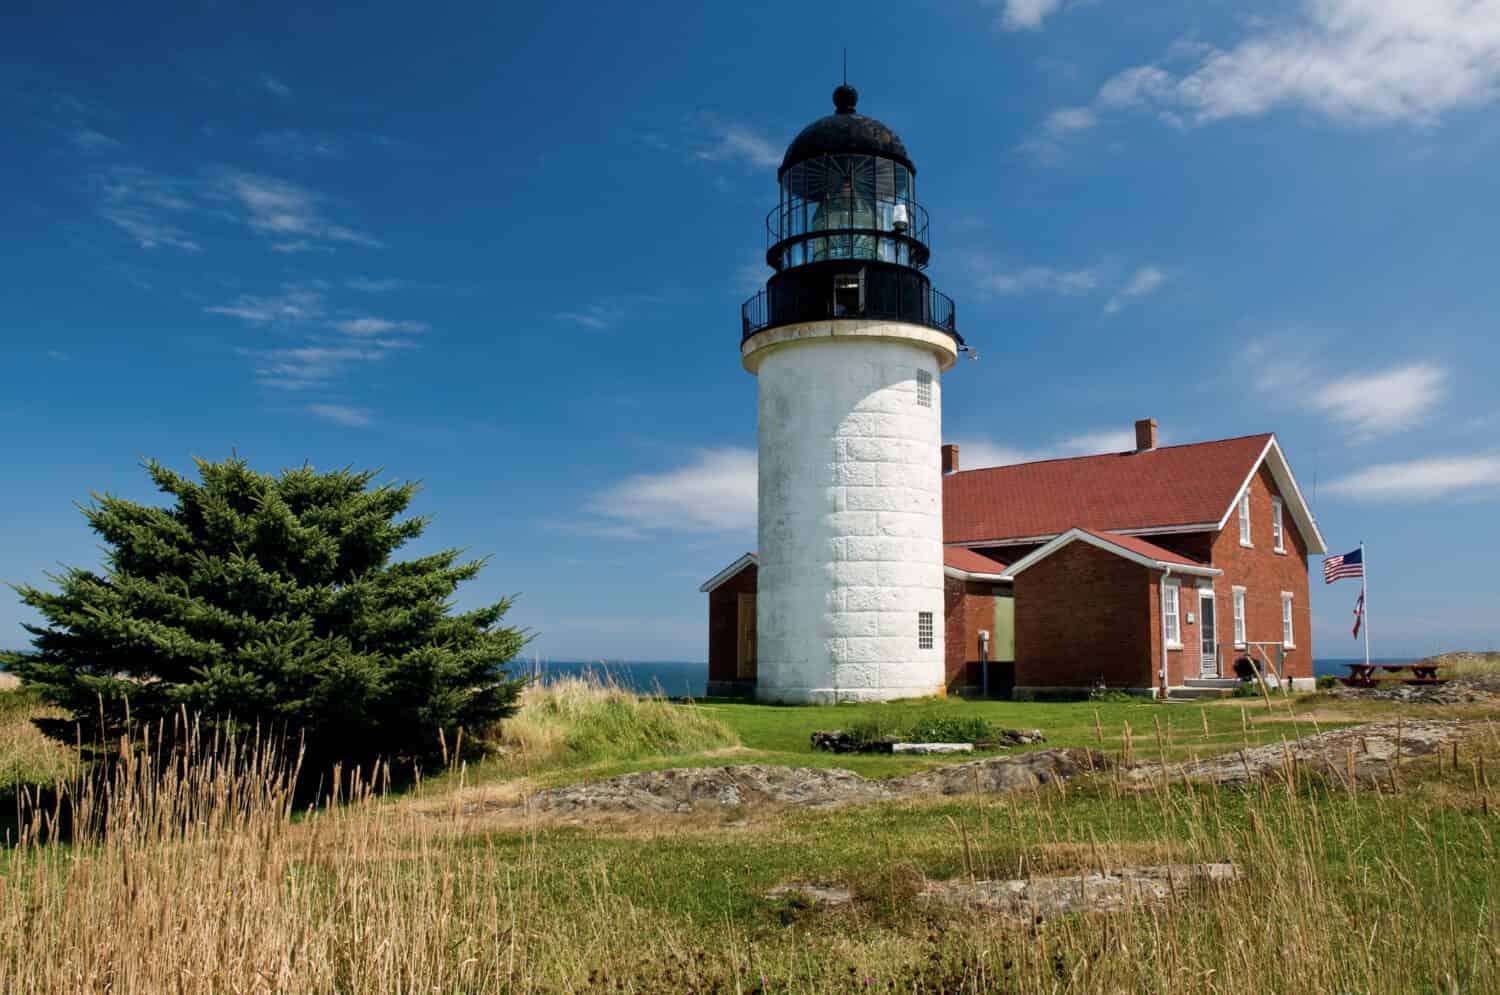 Sequin Island Lighthouse is one of the most powerful beacons on the New England coast.